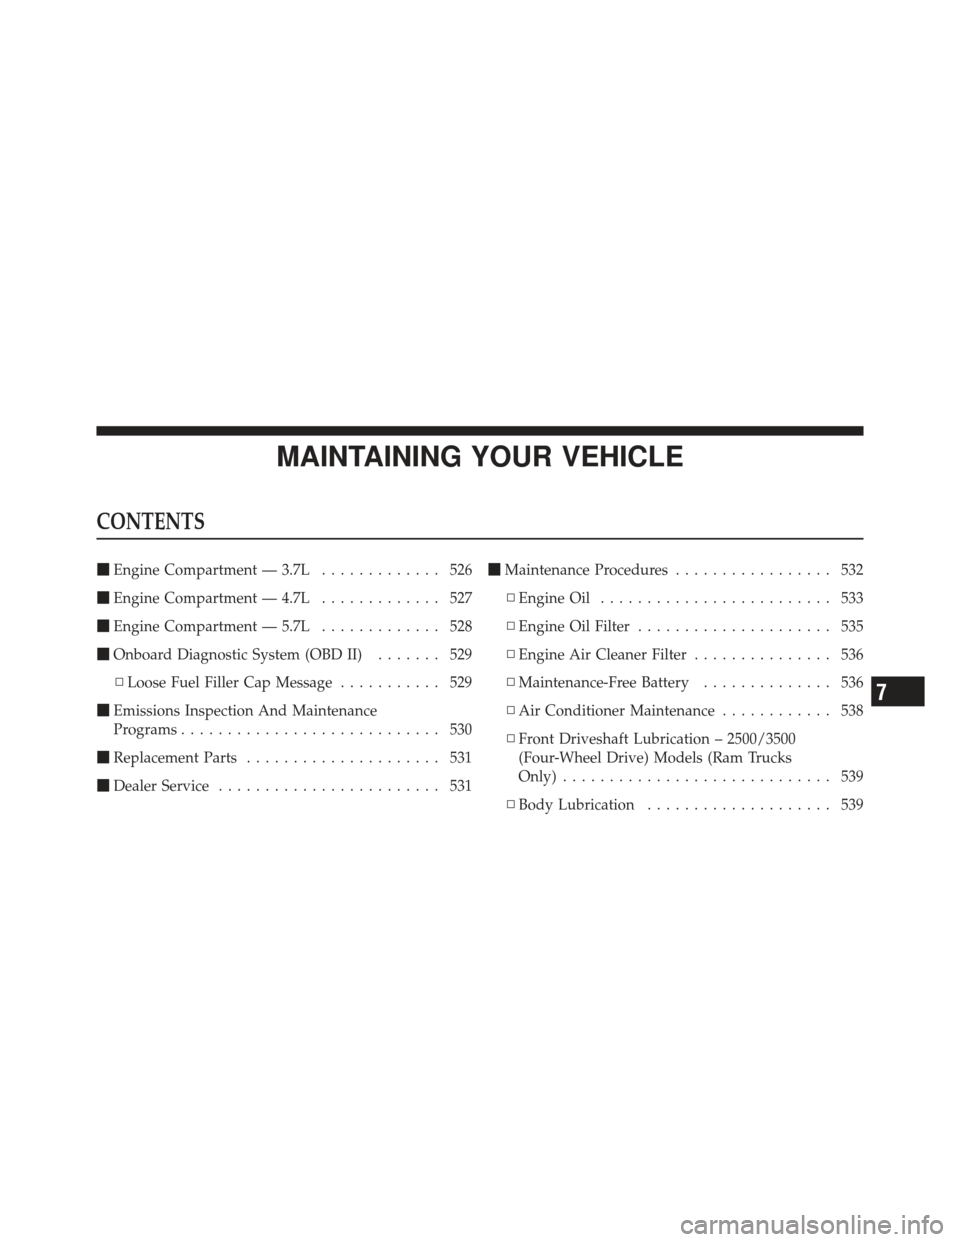 Ram 1500 2011 User Guide MAINTAINING YOUR VEHICLE
CONTENTS
Engine Compartment — 3.7L ............. 526
 Engine Compartment — 4.7L ............. 527
 Engine Compartment — 5.7L ............. 528
 Onboard Diagnostic Sy